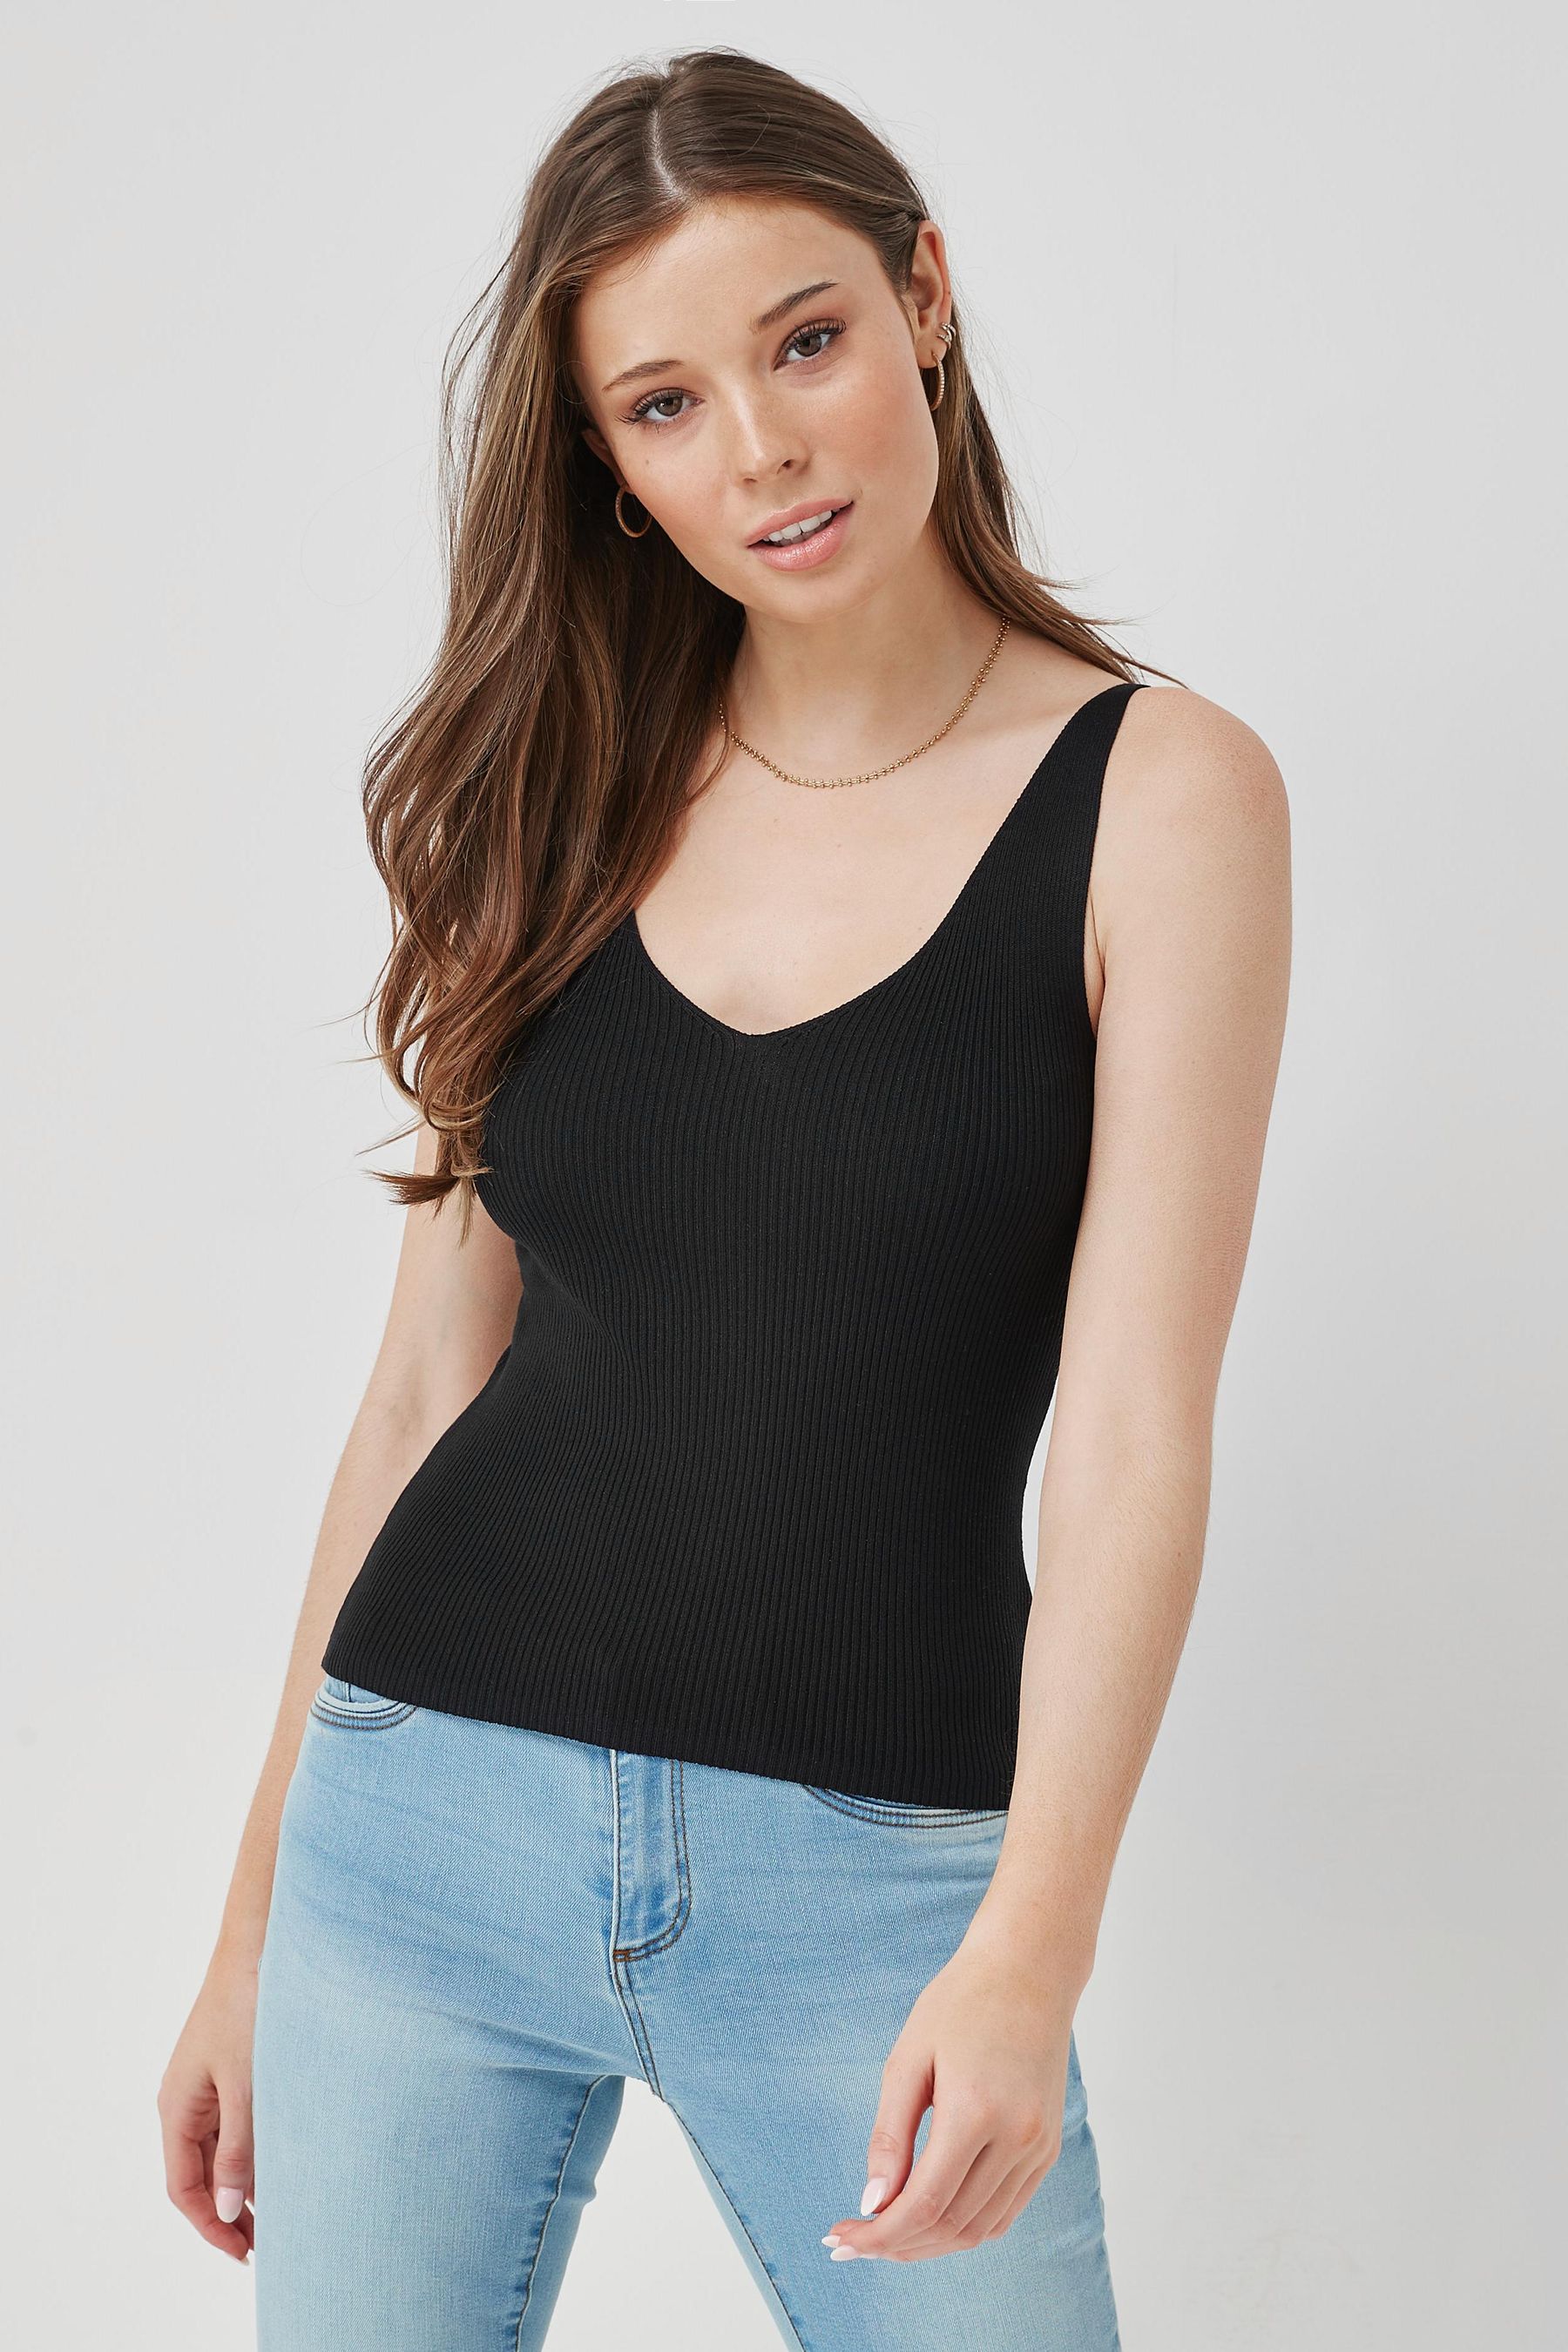 Buy JDY Black Knitted Vest Top from the Next UK online shop